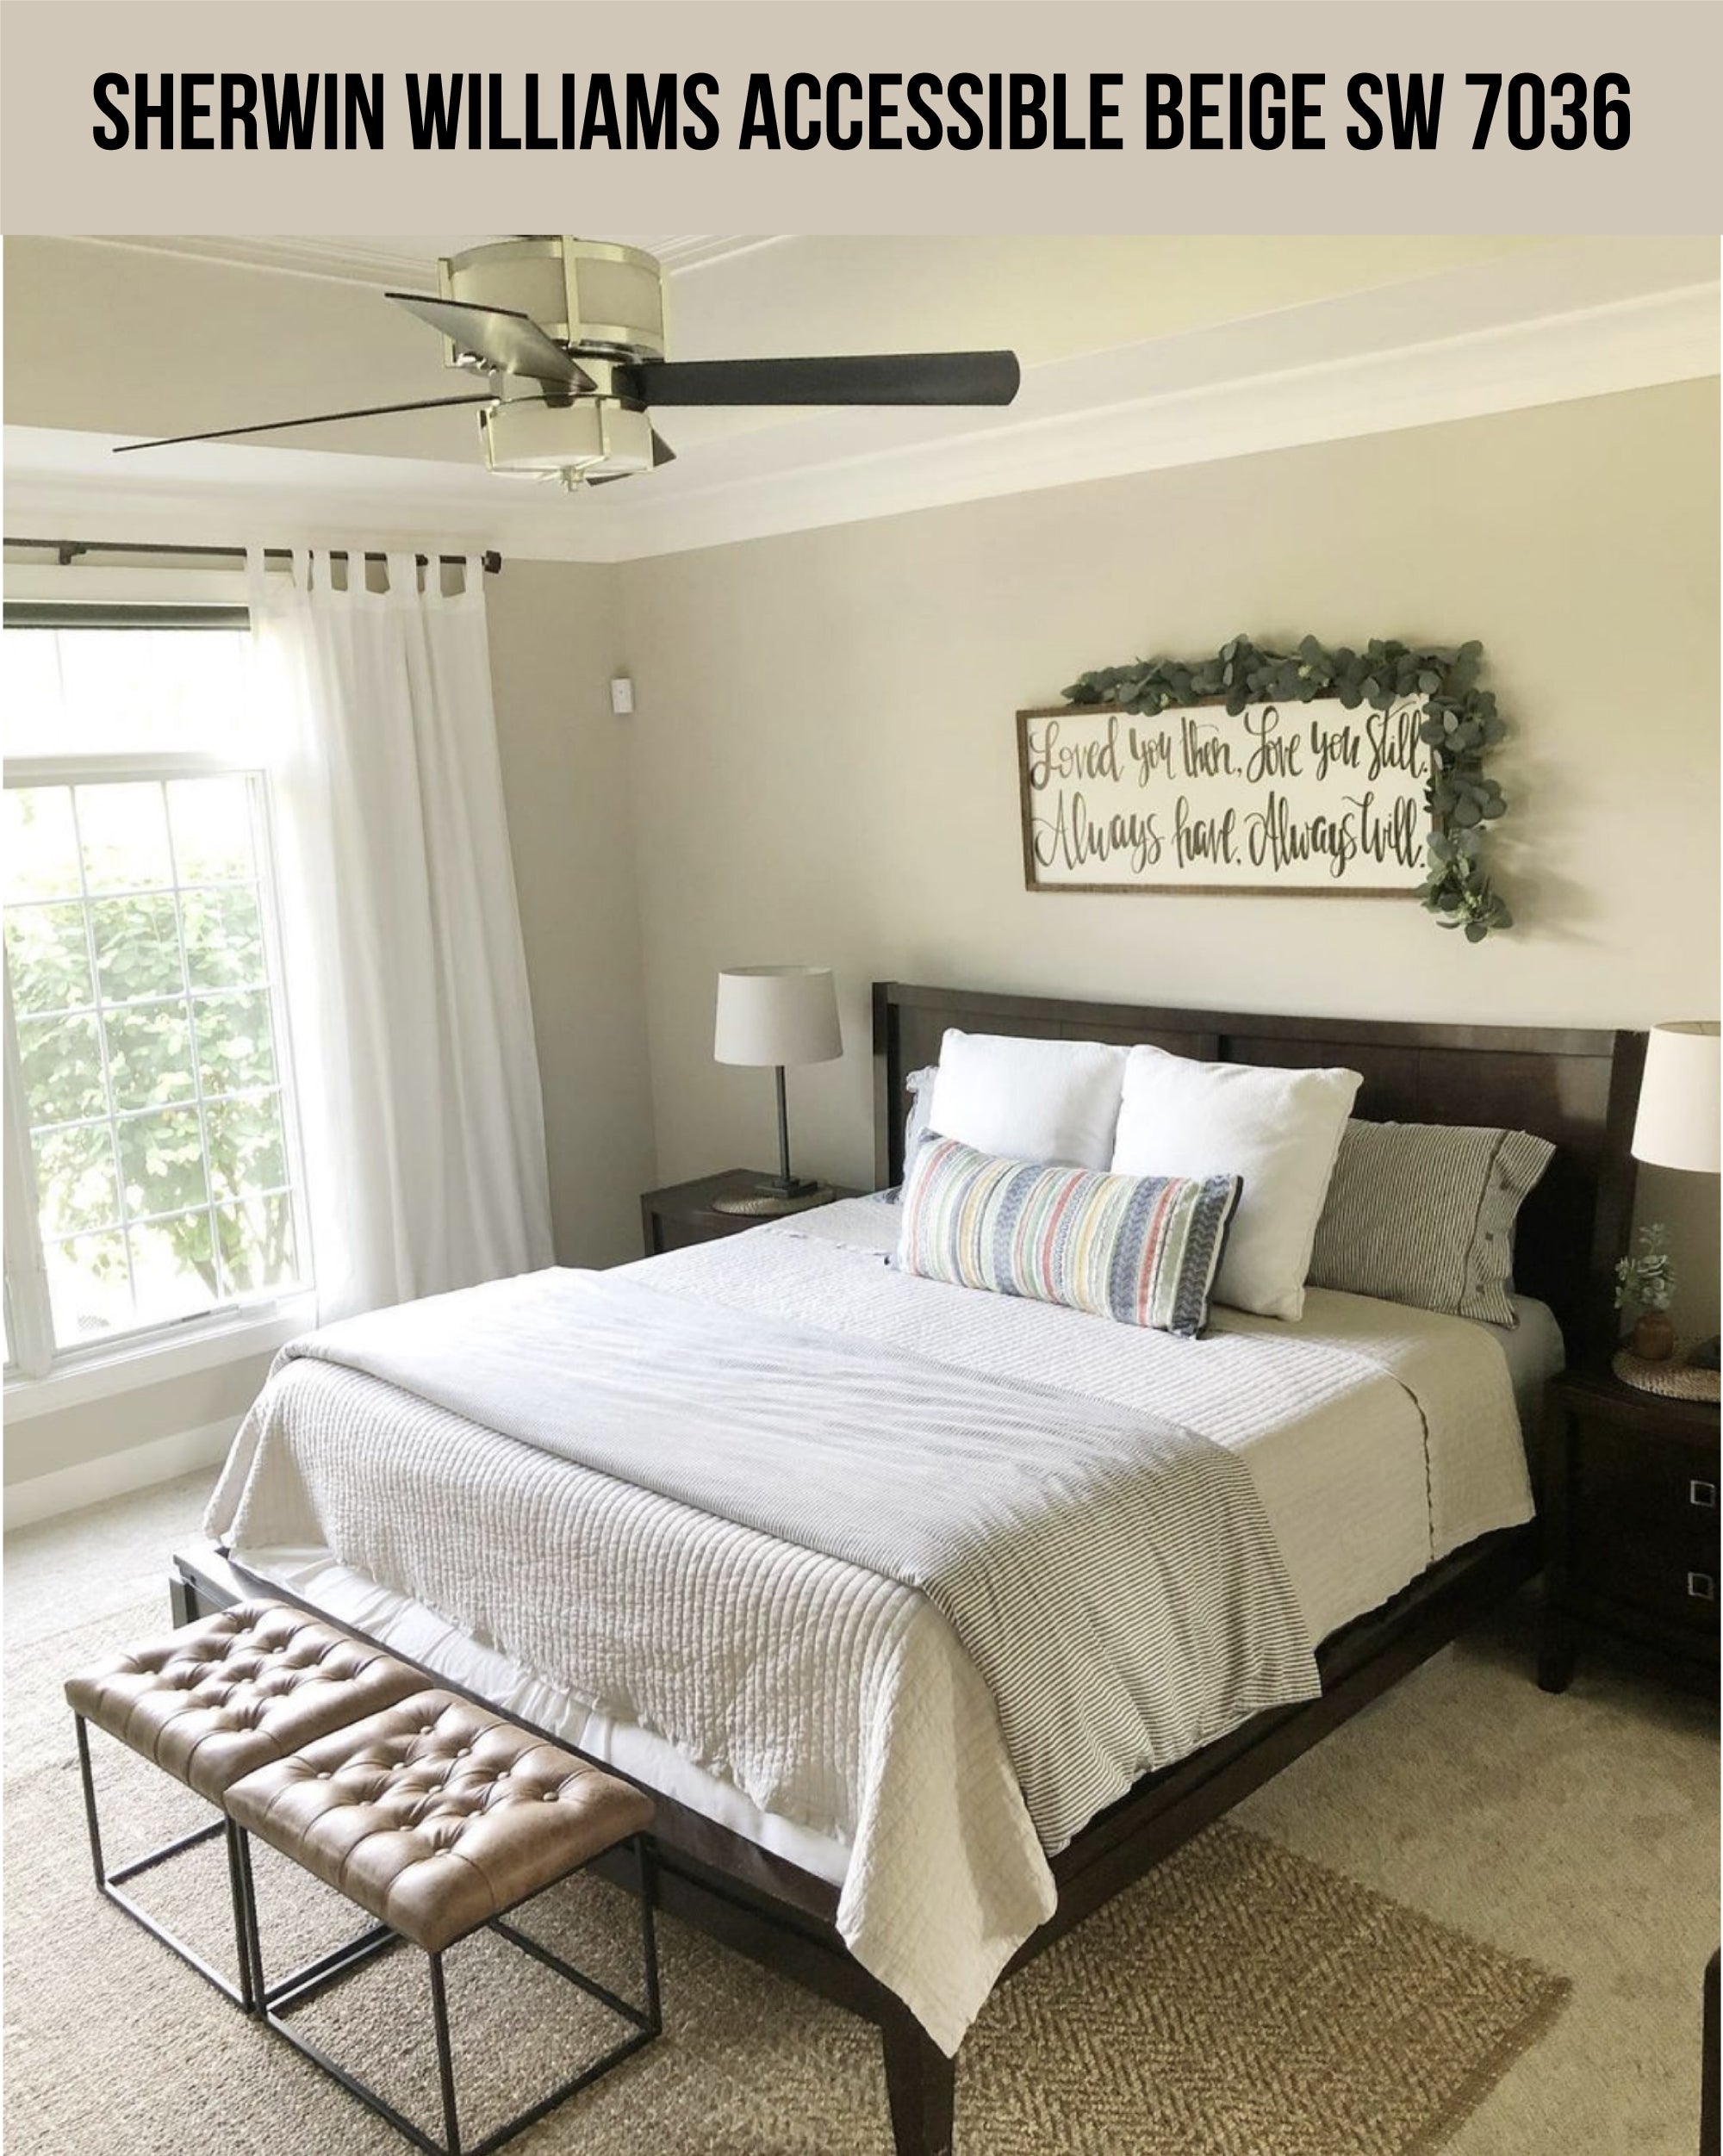 A bed with a fan and a bench and Accessible Beige wall colors (Sherwin Williams Accessible Beige SW 7036)